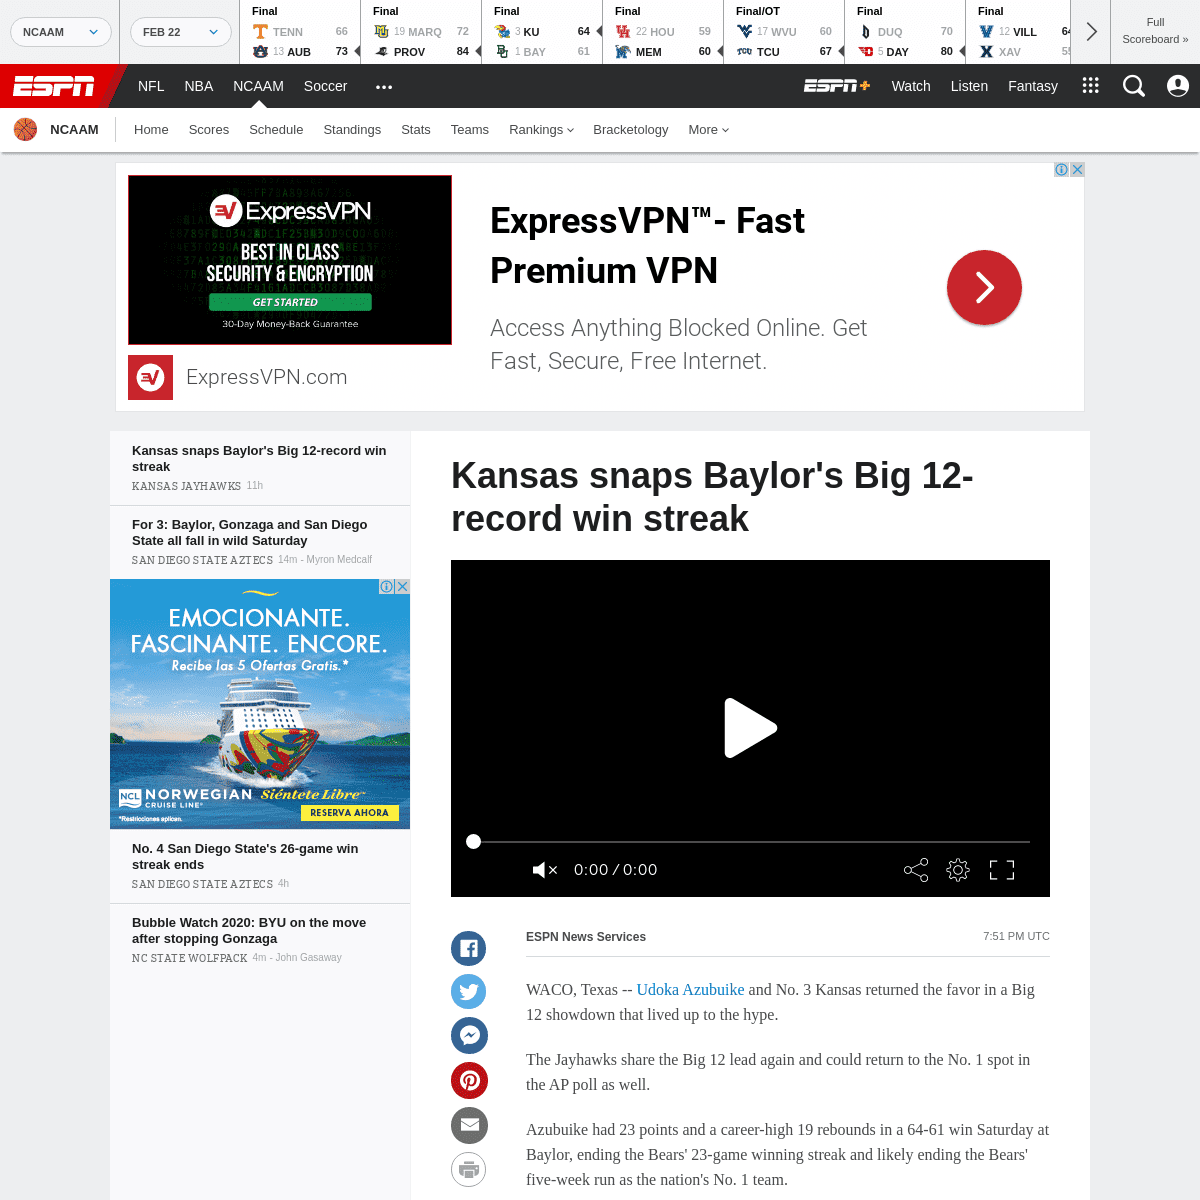 A complete backup of www.espn.com/mens-college-basketball/story/_/id/28758508/kansas-snaps-baylor-big-12-record-win-streak